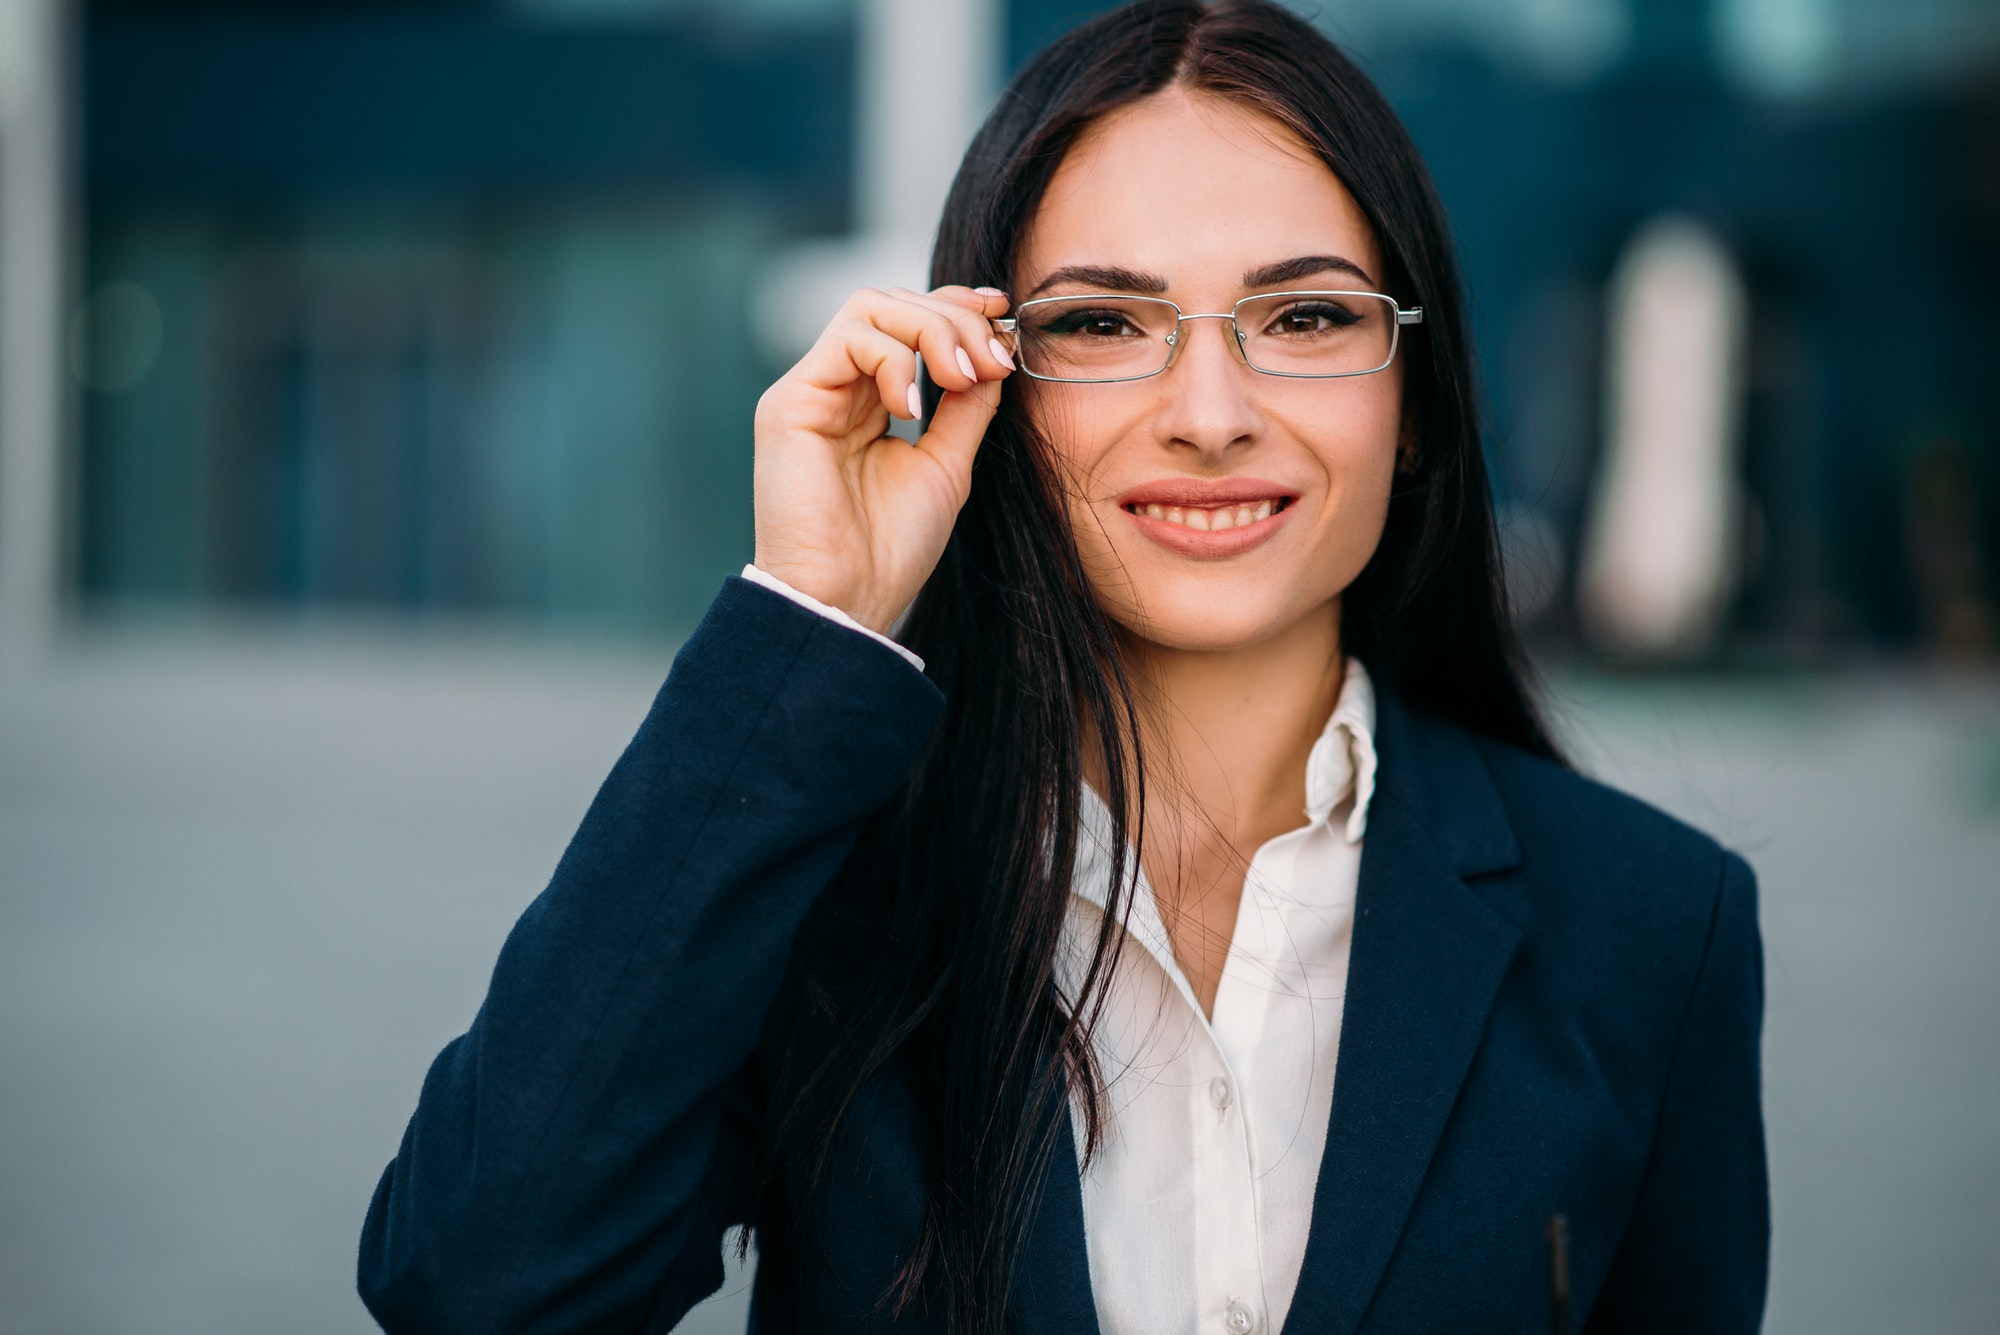 Portrait of business woman in glasses and suit